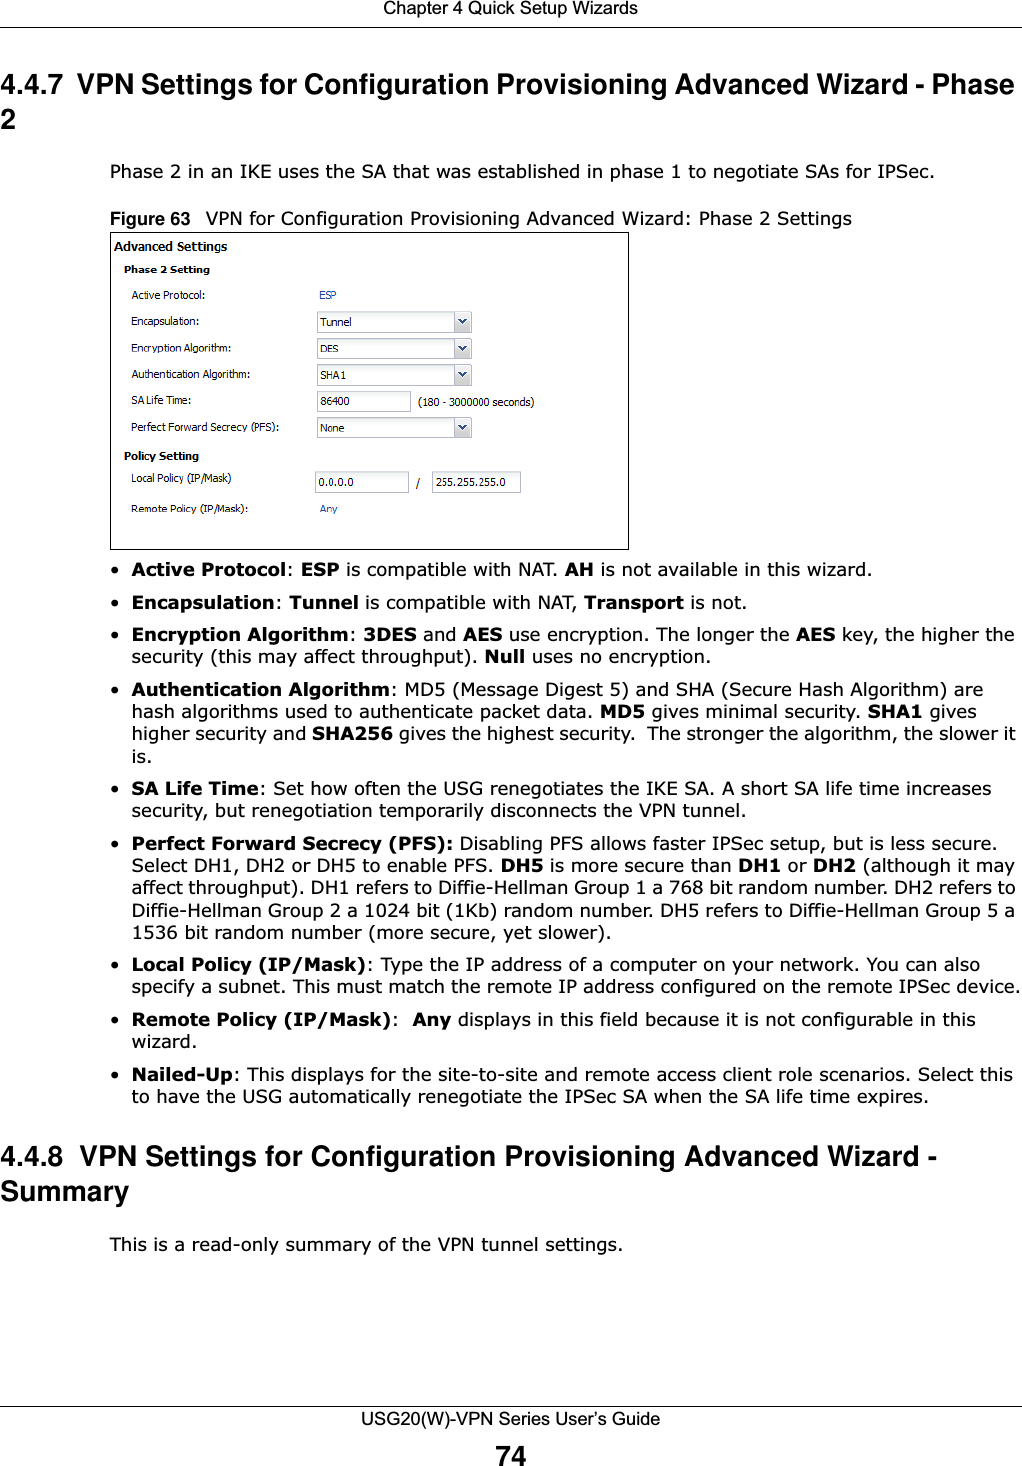 Chapter 4 Quick Setup WizardsUSG20(W)-VPN Series User’s Guide744.4.7  VPN Settings for Configuration Provisioning Advanced Wizard - Phase 2Phase 2 in an IKE uses the SA that was established in phase 1 to negotiate SAs for IPSec.Figure 63   VPN for Configuration Provisioning Advanced Wizard: Phase 2 Settings•Active Protocol: ESP is compatible with NAT. AH is not available in this wizard.•Encapsulation: Tunnel is compatible with NAT, Transport is not.•Encryption Algorithm: 3DES and AES use encryption. The longer the AES key, the higher the security (this may affect throughput). Null uses no encryption.•Authentication Algorithm: MD5 (Message Digest 5) and SHA (Secure Hash Algorithm) are hash algorithms used to authenticate packet data. MD5 gives minimal security. SHA1 gives higher security and SHA256 gives the highest security.  The stronger the algorithm, the slower it is.•SA Life Time: Set how often the USG renegotiates the IKE SA. A short SA life time increases security, but renegotiation temporarily disconnects the VPN tunnel. •Perfect Forward Secrecy (PFS): Disabling PFS allows faster IPSec setup, but is less secure. Select DH1, DH2 or DH5 to enable PFS. DH5 is more secure than DH1 or DH2 (although it may affect throughput). DH1 refers to Diffie-Hellman Group 1 a 768 bit random number. DH2 refers to Diffie-Hellman Group 2 a 1024 bit (1Kb) random number. DH5 refers to Diffie-Hellman Group 5 a 1536 bit random number (more secure, yet slower).•Local Policy (IP/Mask): Type the IP address of a computer on your network. You can also specify a subnet. This must match the remote IP address configured on the remote IPSec device.•Remote Policy (IP/Mask):  Any displays in this field because it is not configurable in this wizard.•Nailed-Up: This displays for the site-to-site and remote access client role scenarios. Select this to have the USG automatically renegotiate the IPSec SA when the SA life time expires.4.4.8  VPN Settings for Configuration Provisioning Advanced Wizard - SummaryThis is a read-only summary of the VPN tunnel settings.